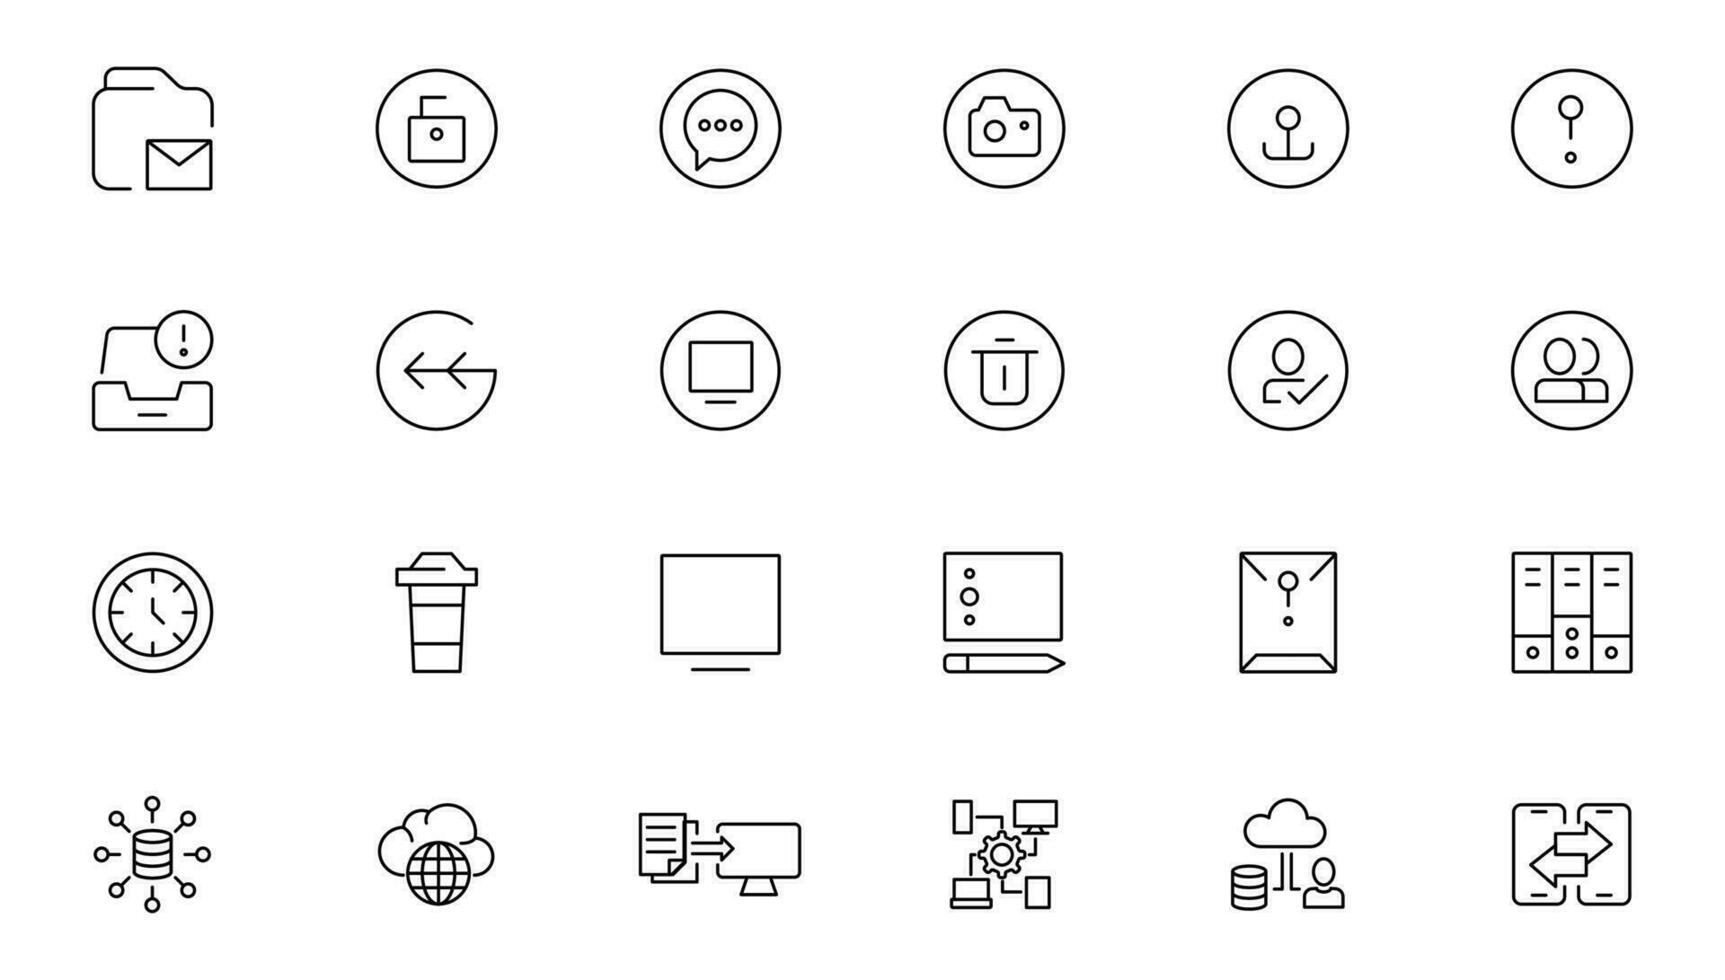 Information technology editable stroke outline icon set with IT network system, communication, online computer, website content, web design, software, data center, mobile device and app thin line sign vector